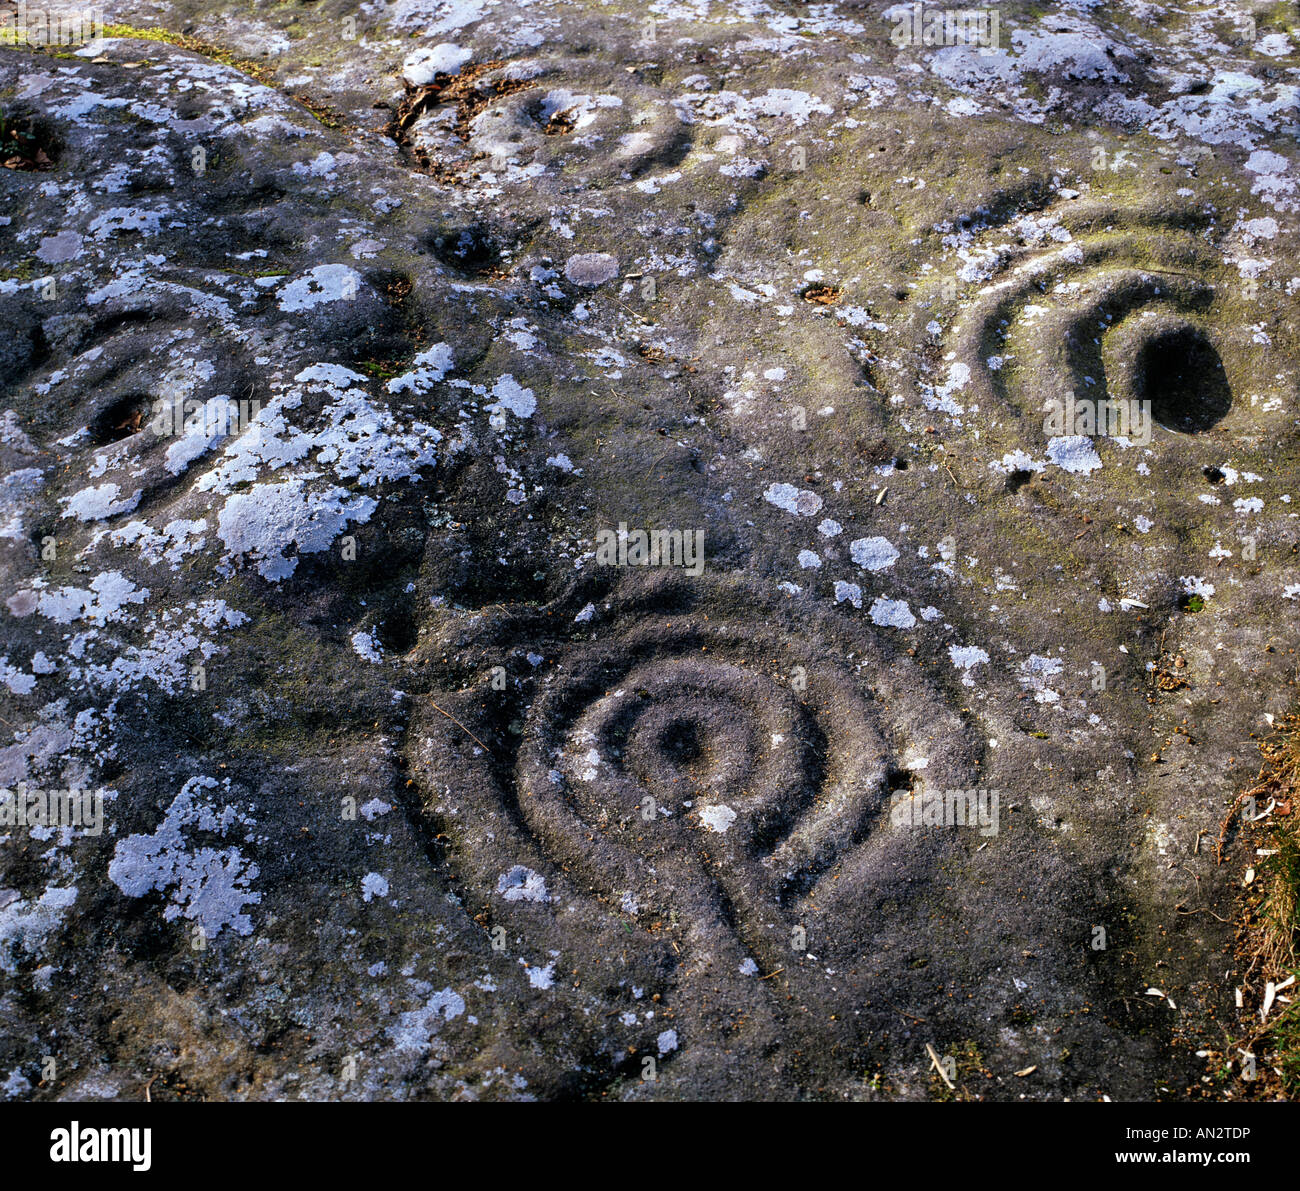 A bronze age cup and ring marked stone near Roughting Linn in Northumberland, England Stock Photo